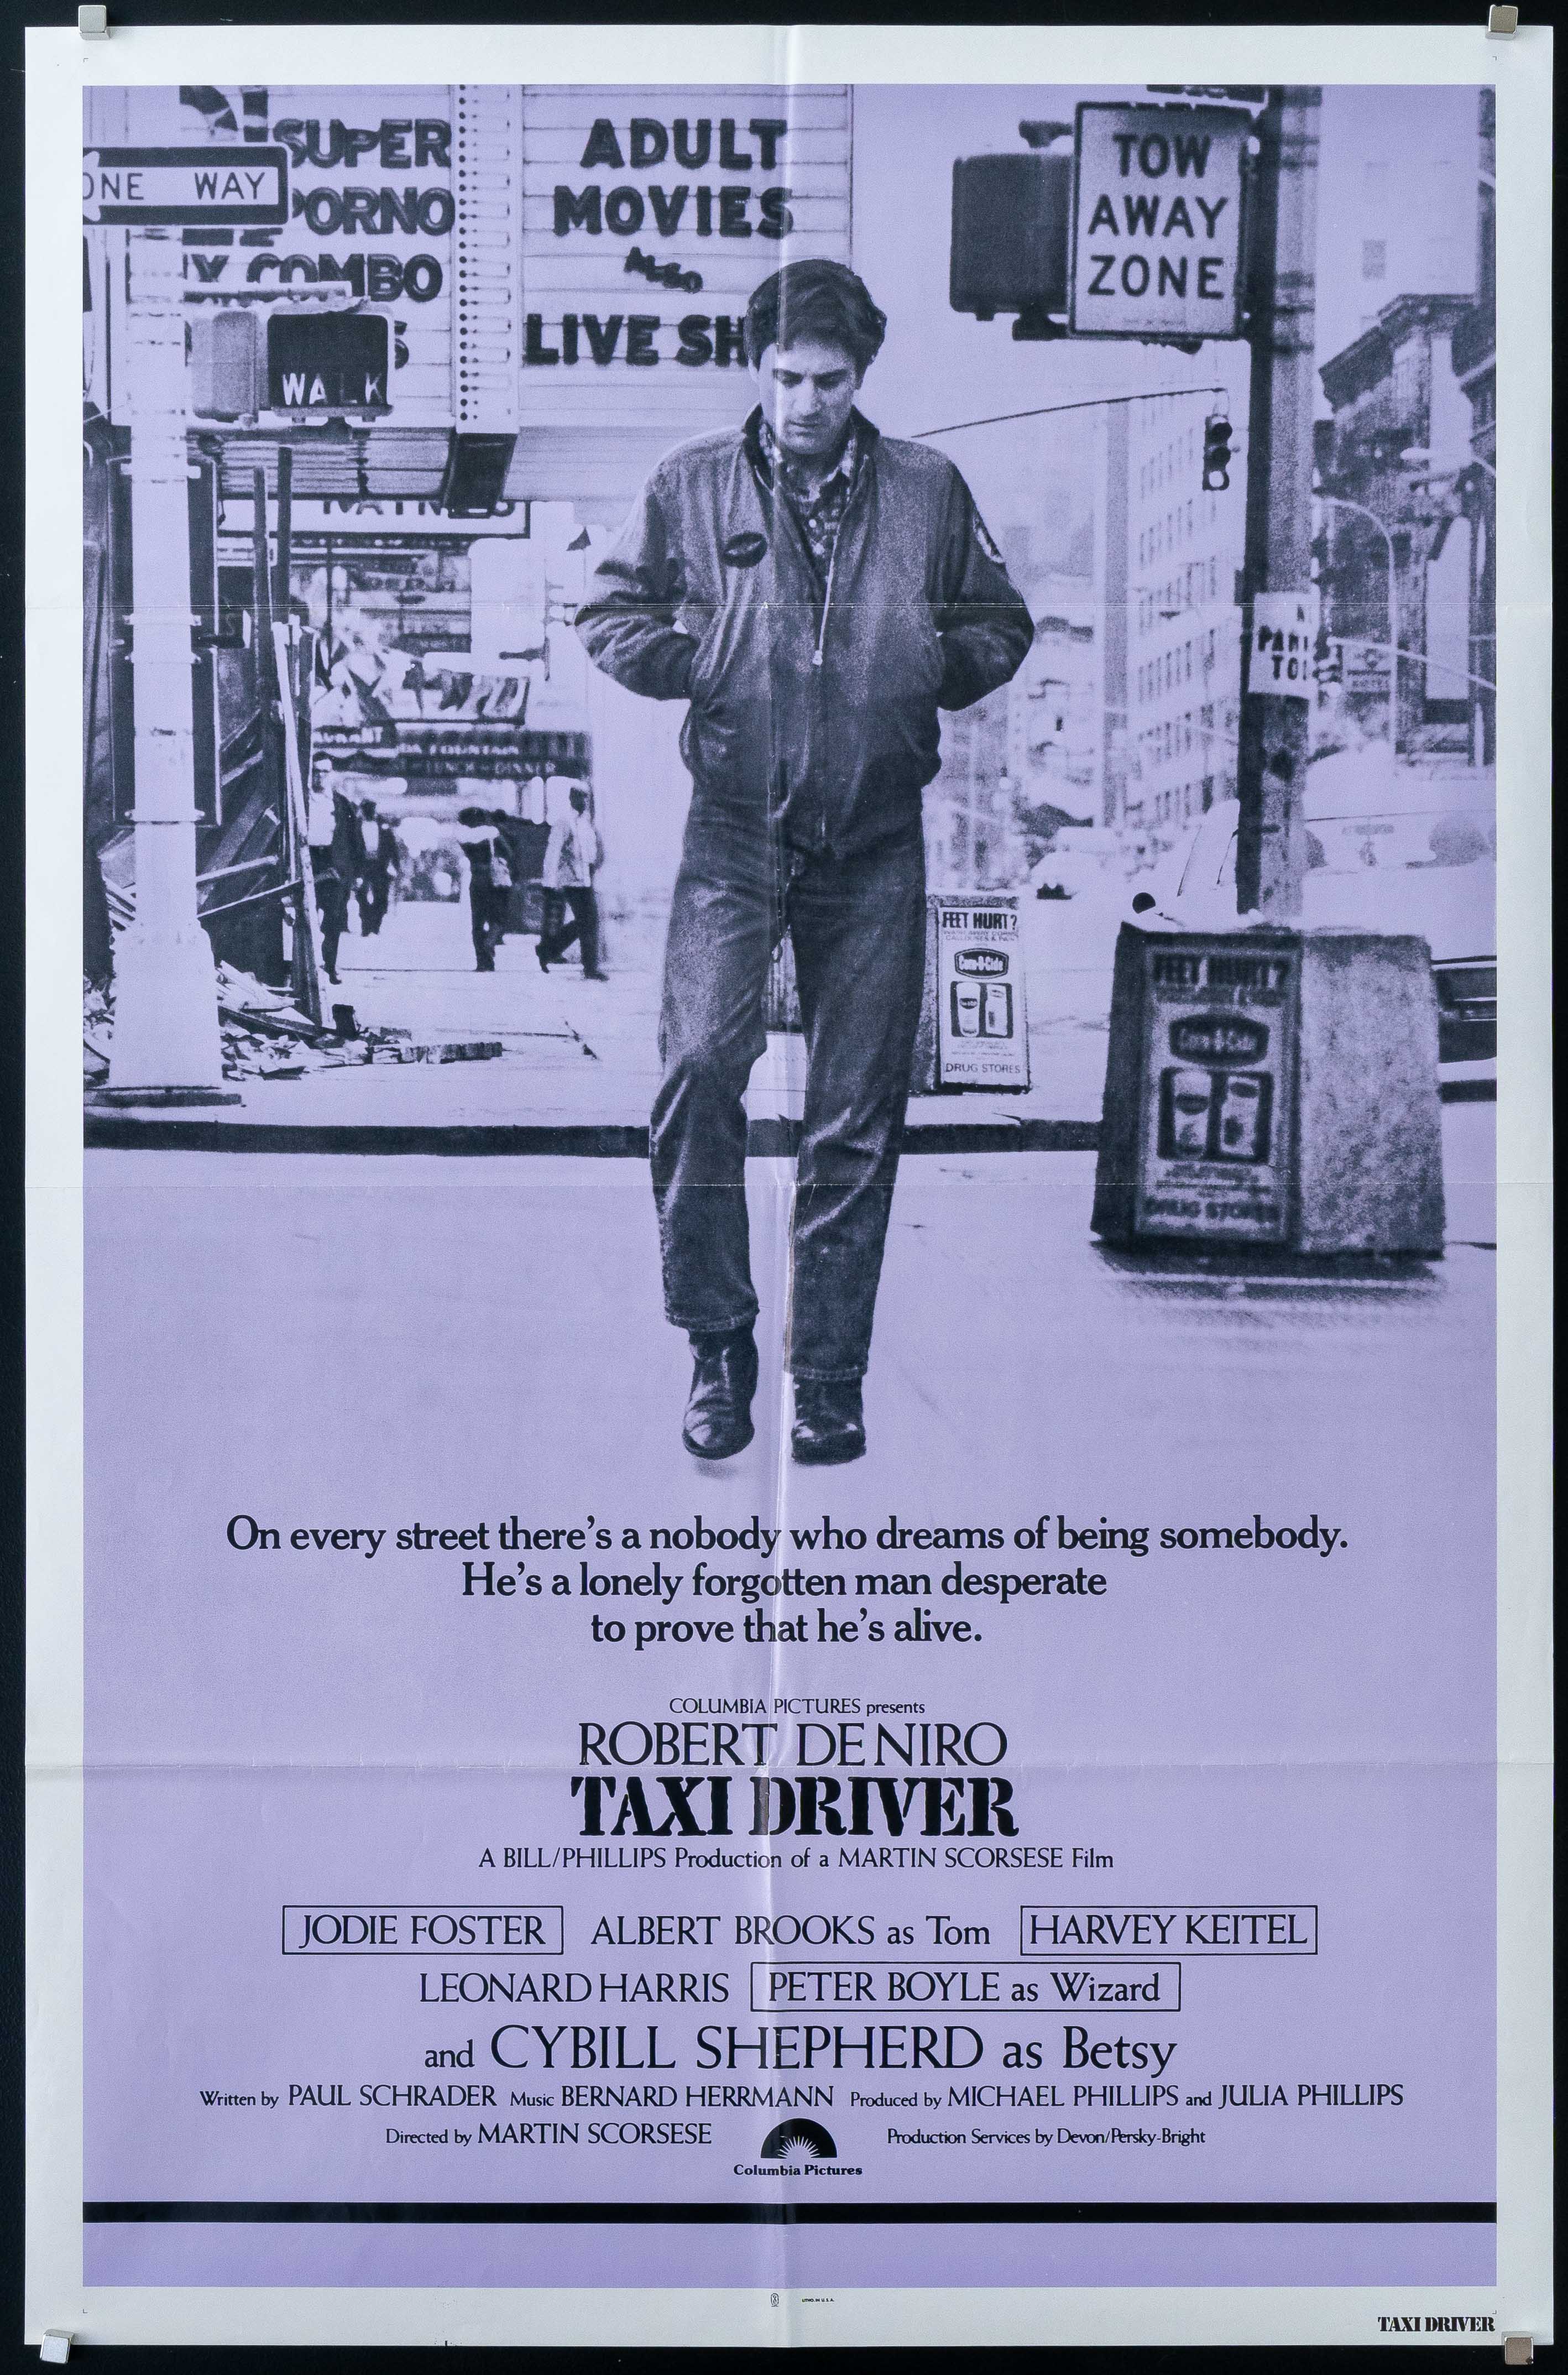 Taxi Driver Movie Poster 1976 1 Sheet (27x41)